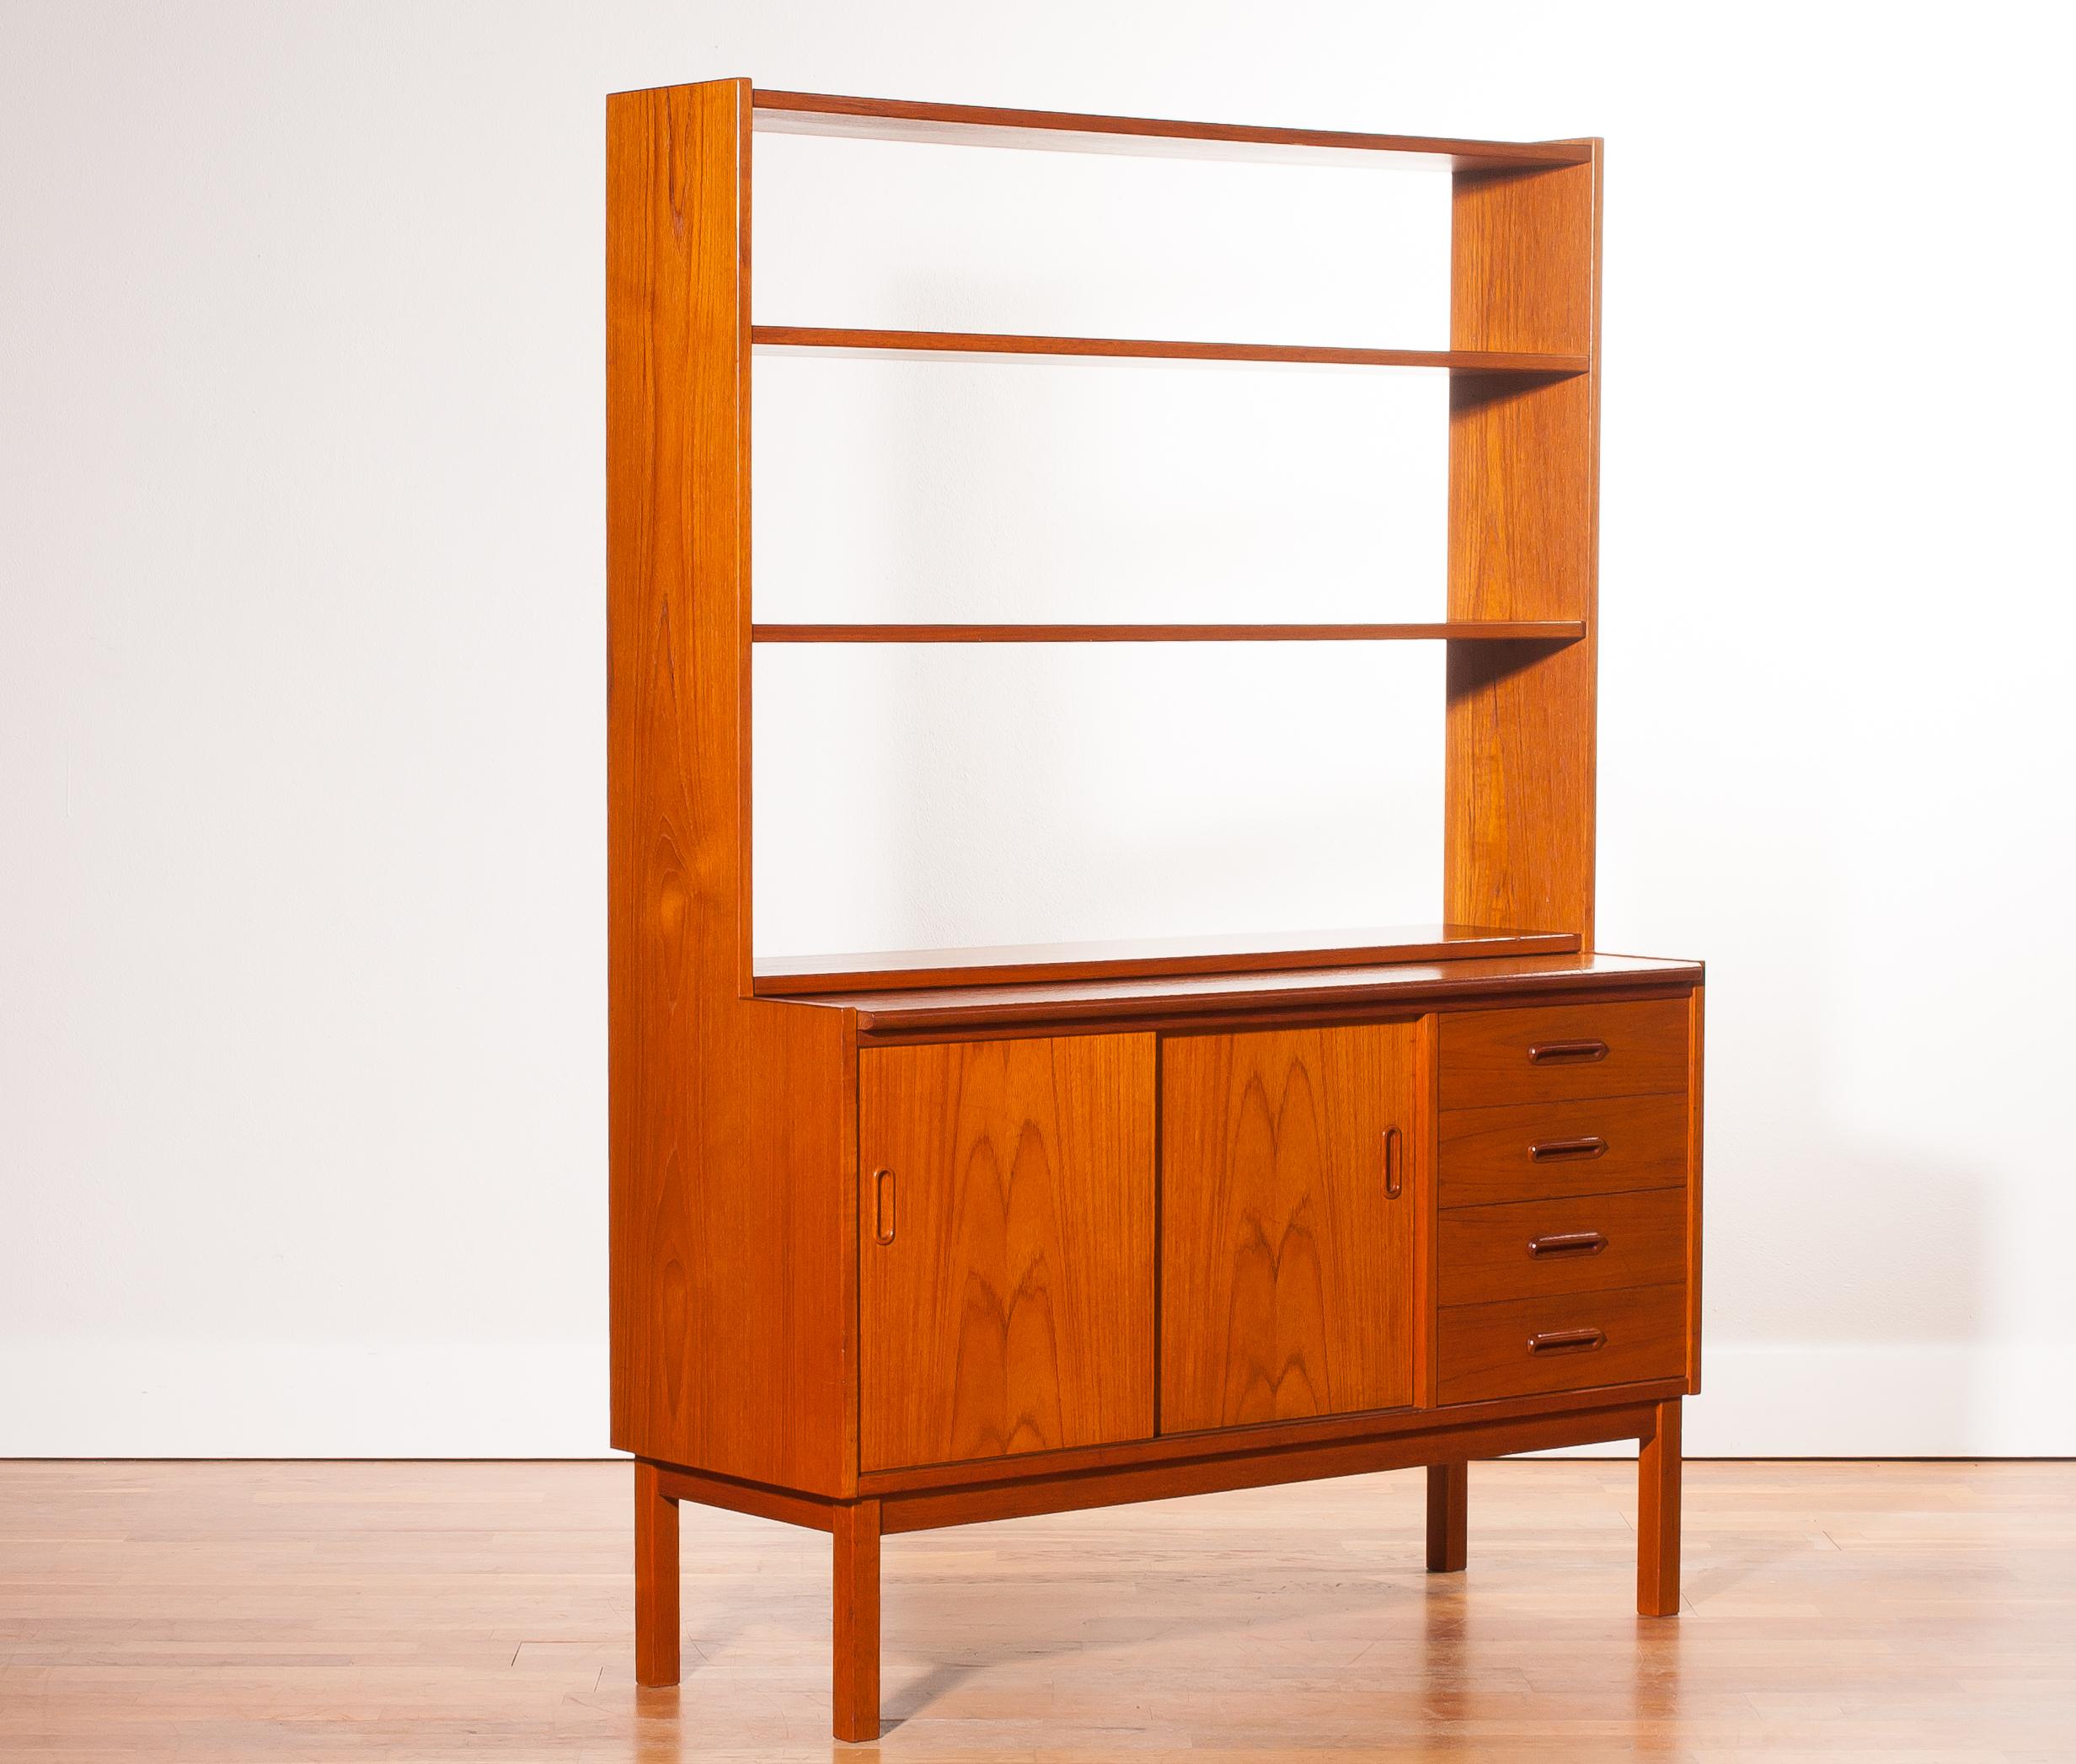 1960s, Teak Book Case with Slidable Writing / Working Space from Sweden 5